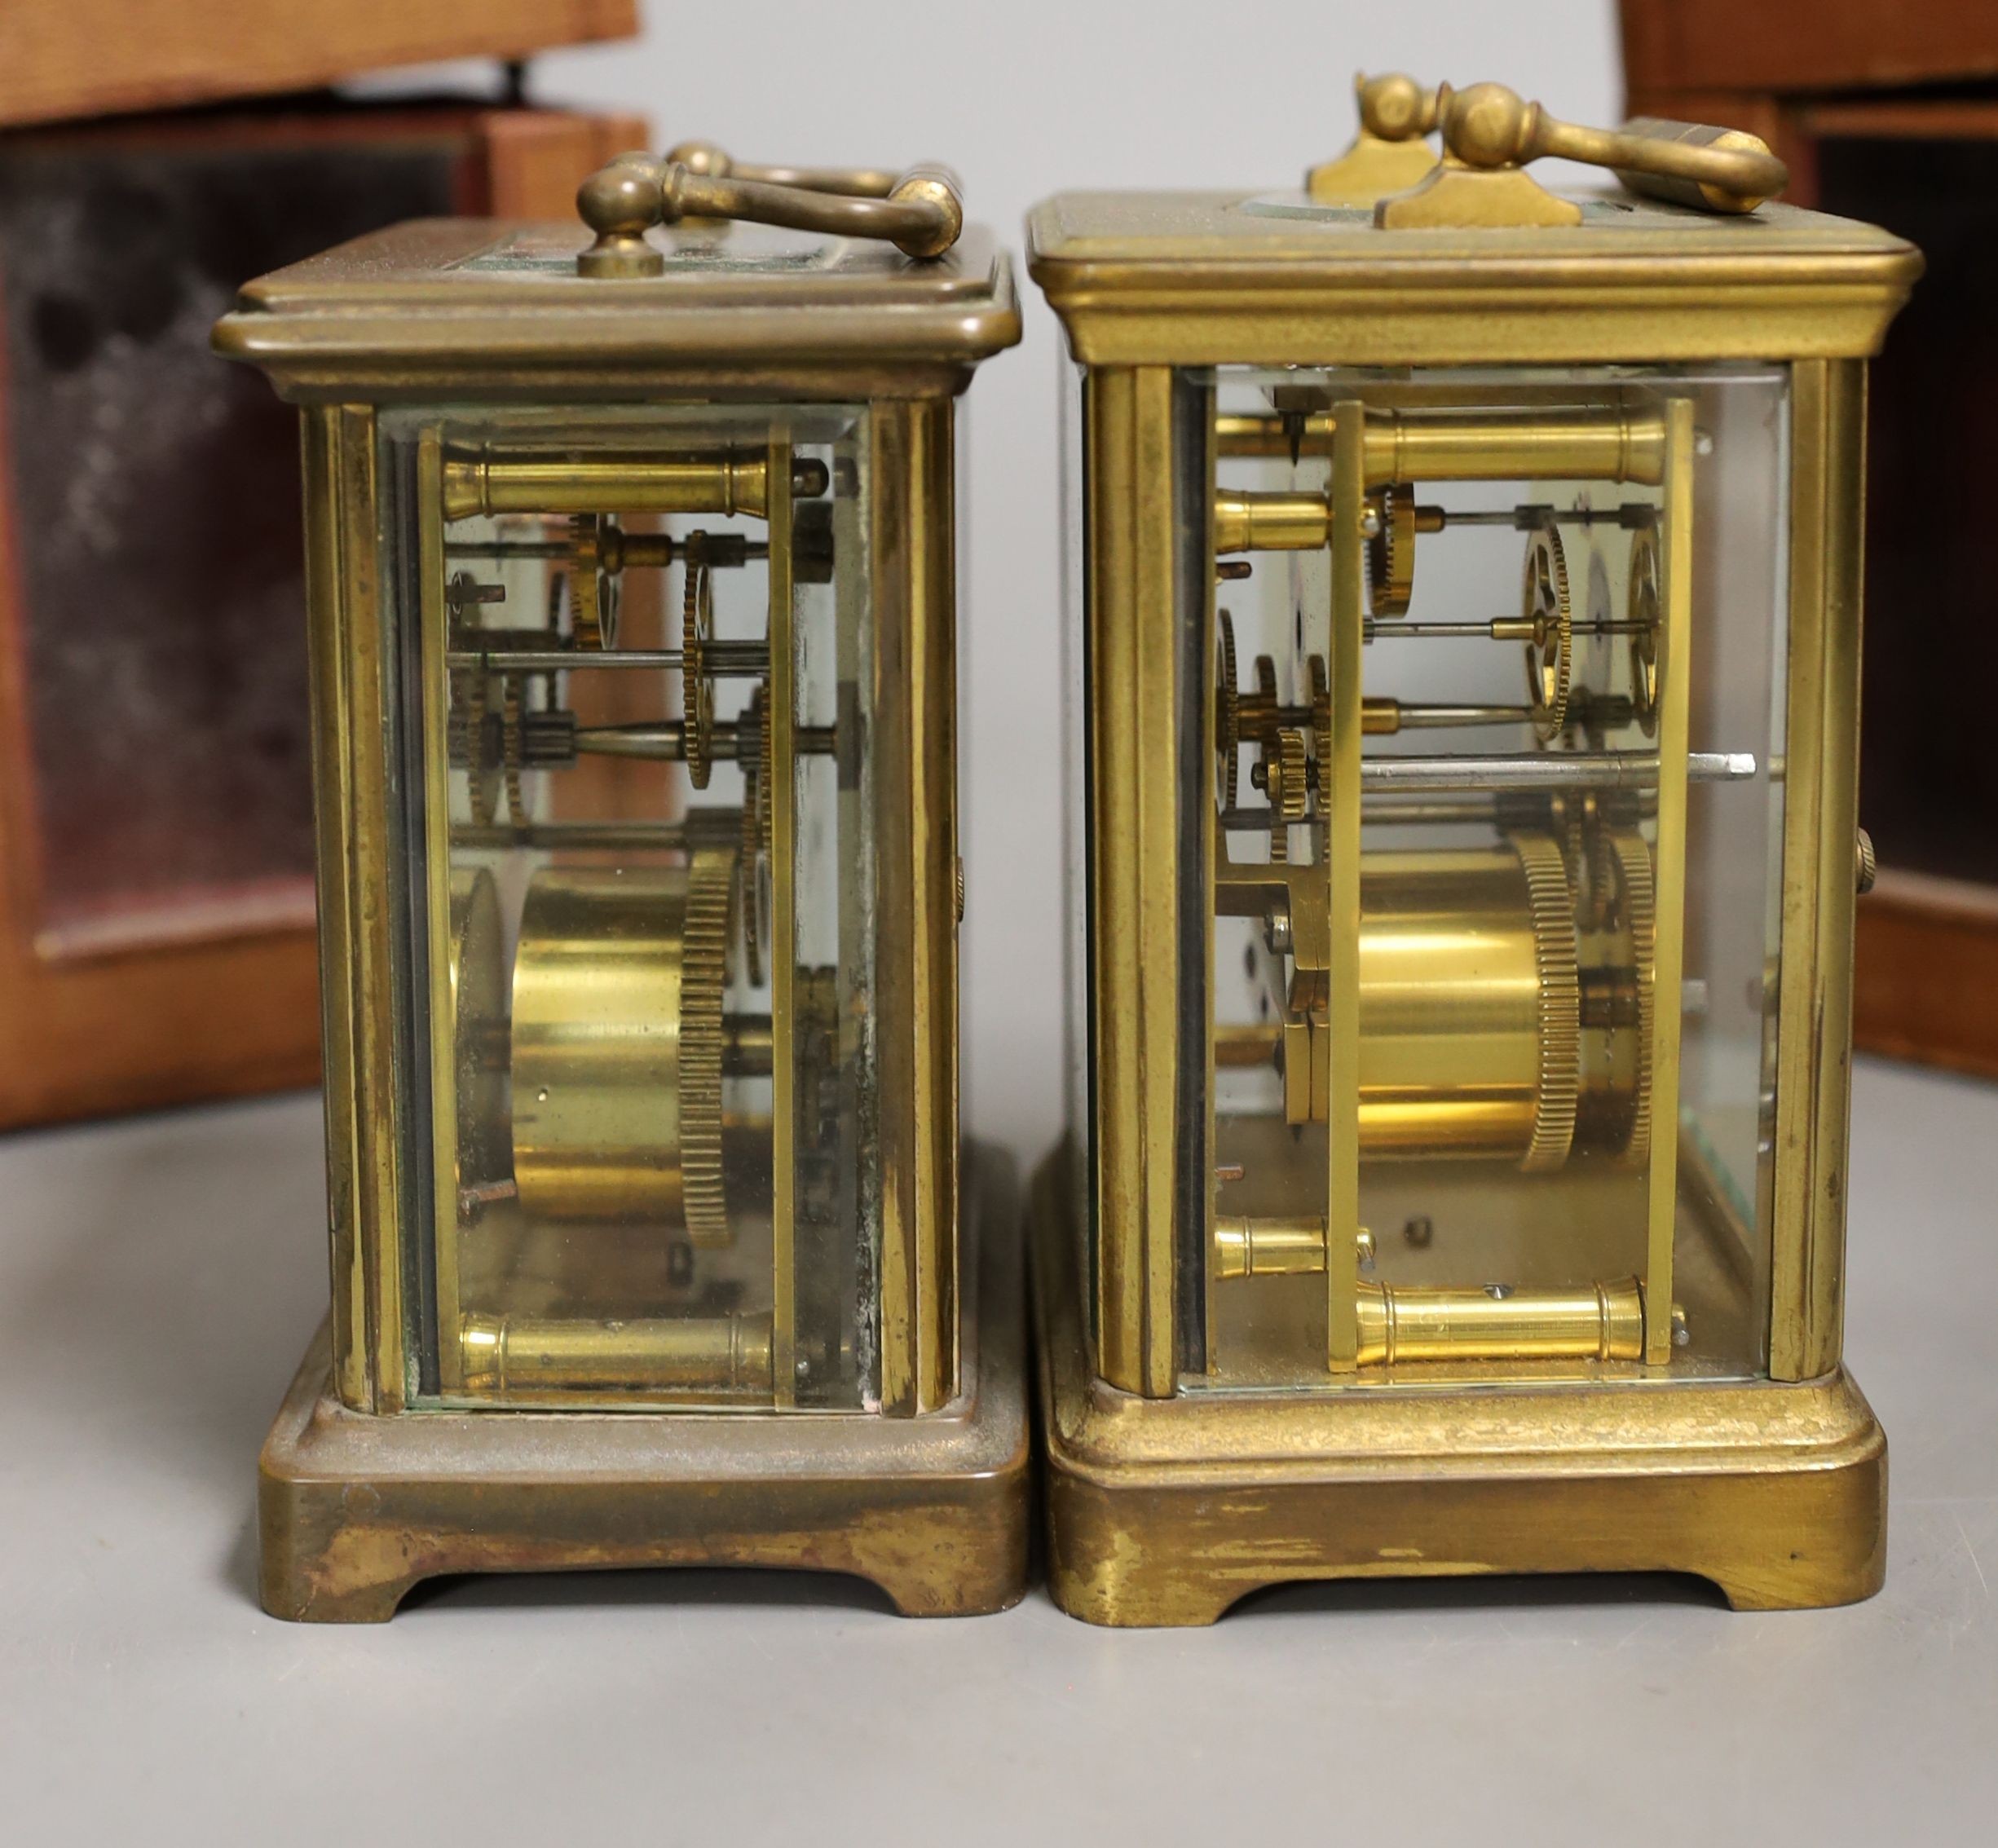 Two leather cased brass carriage timepieces, 14 cms high including case.